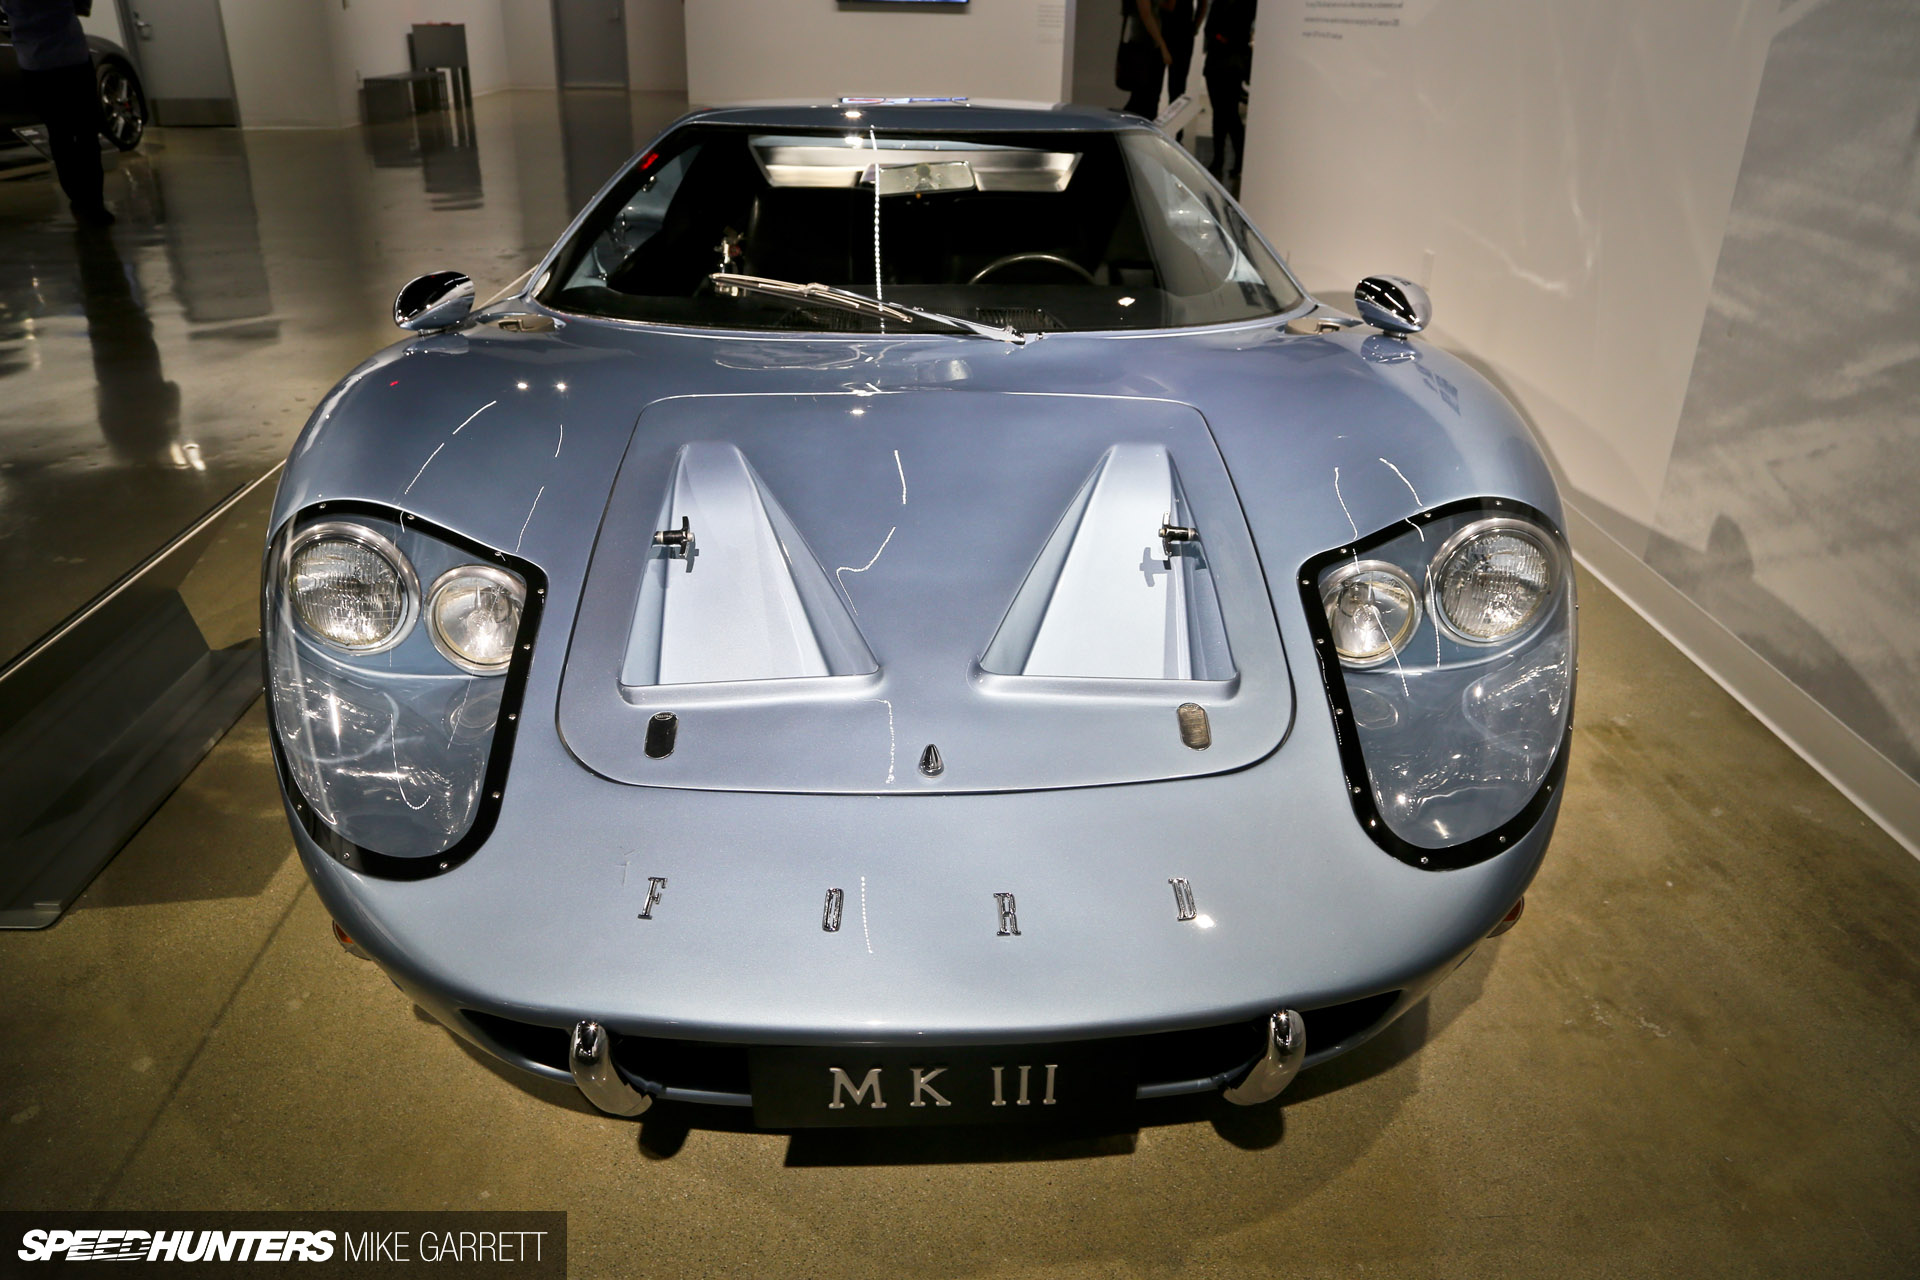 Gt40 Mkiii A Racing Legend On The Road Speedhunters